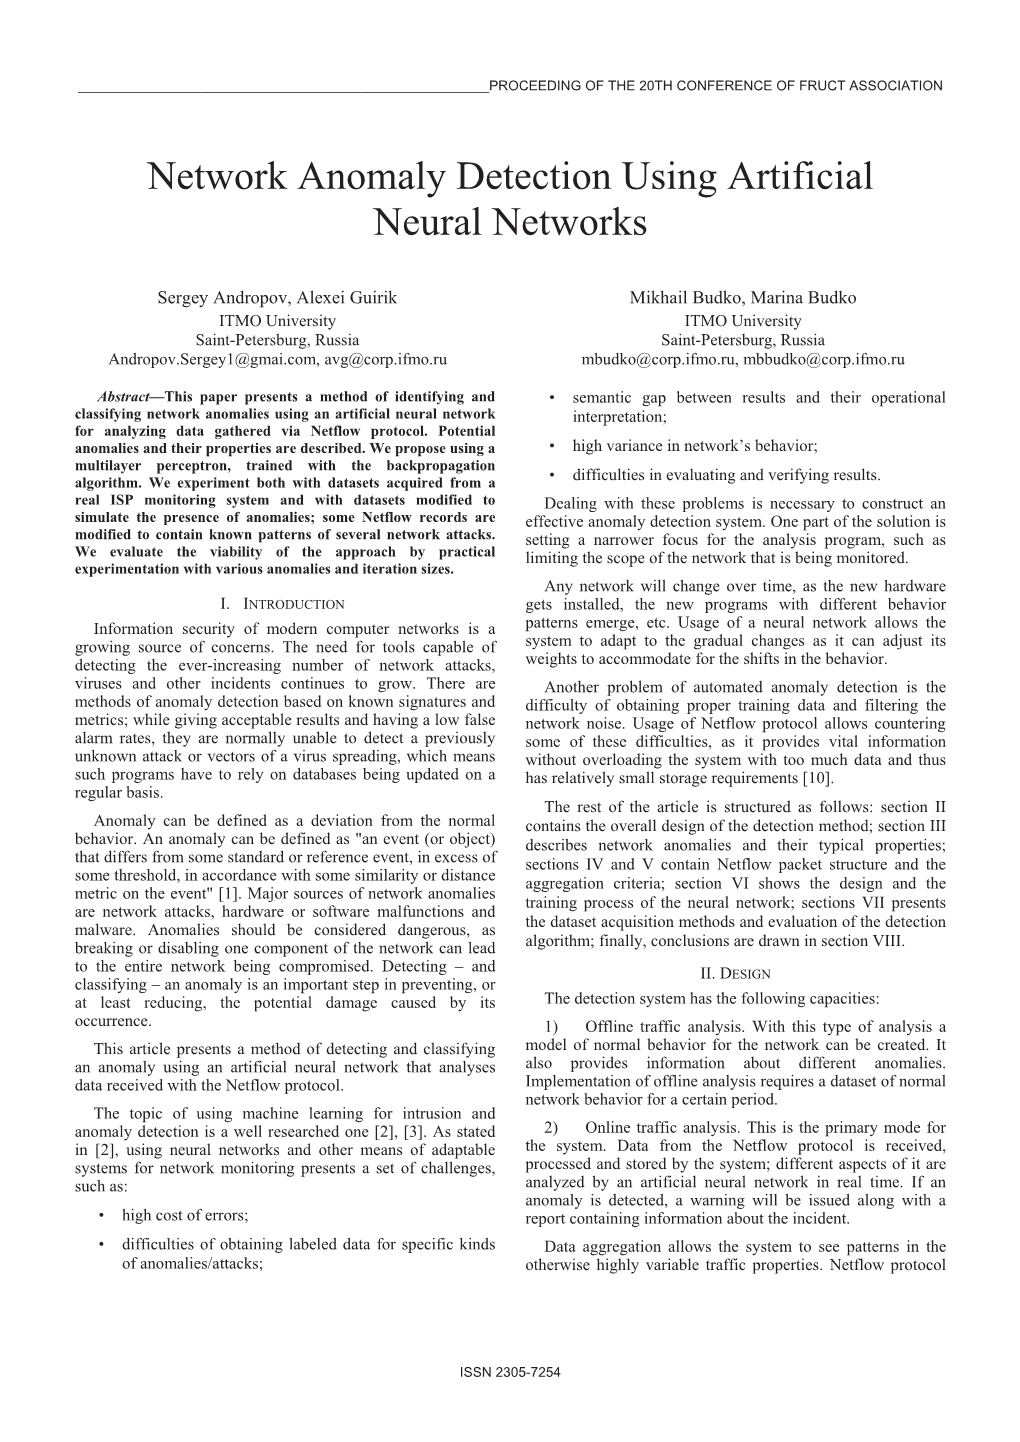 Network Anomaly Detection Using Artificial Neural Networks